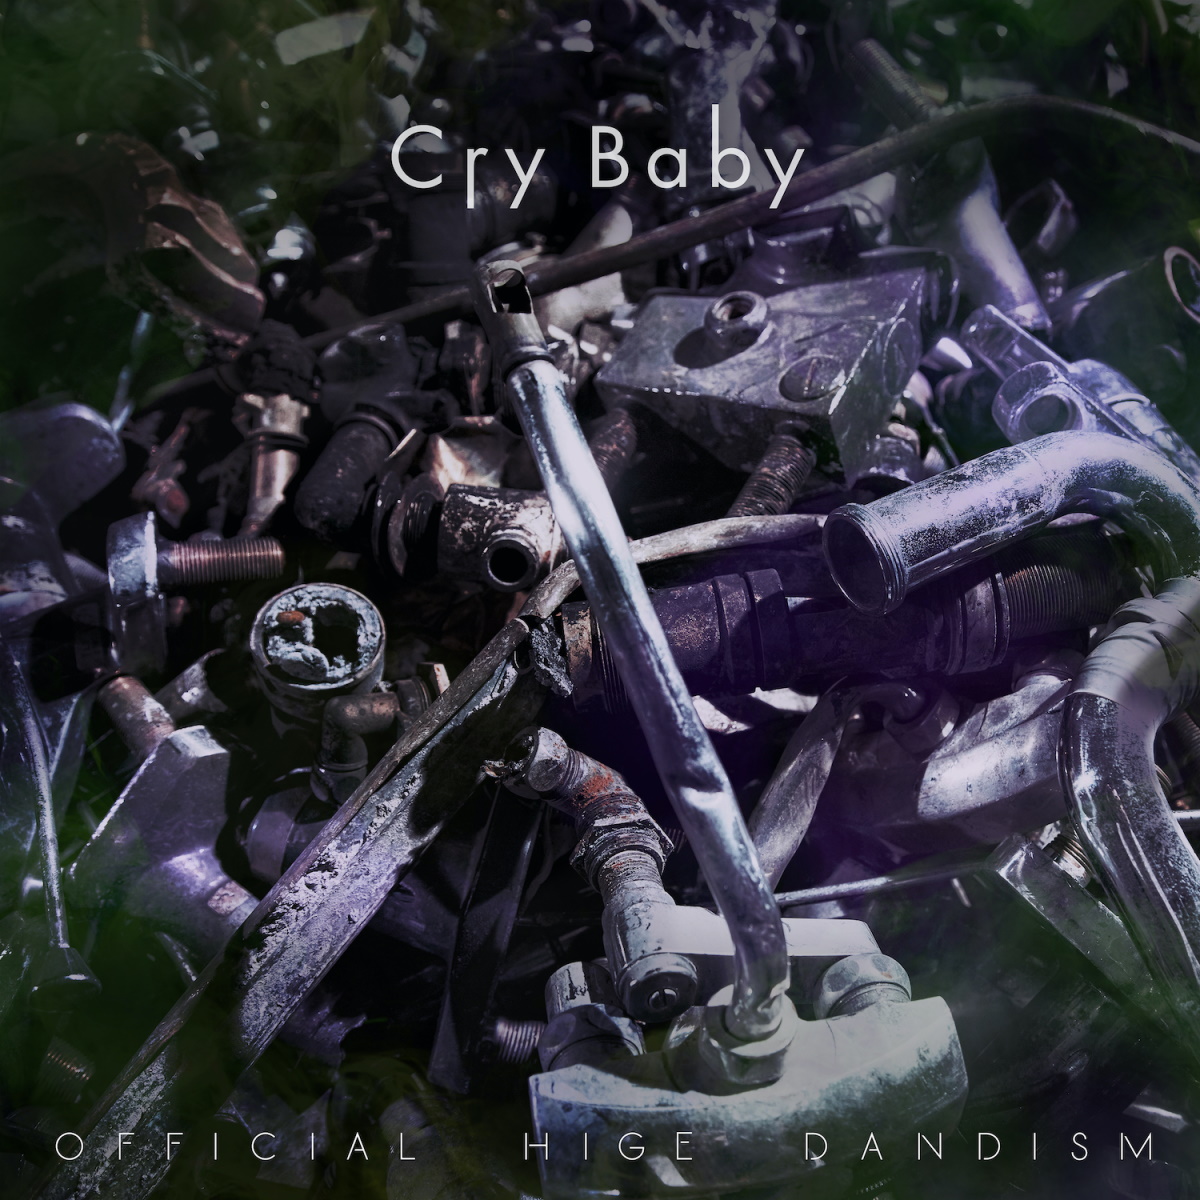 『Official髭男dism - Cry Baby 歌詞』収録の『Cry Baby』ジャケット